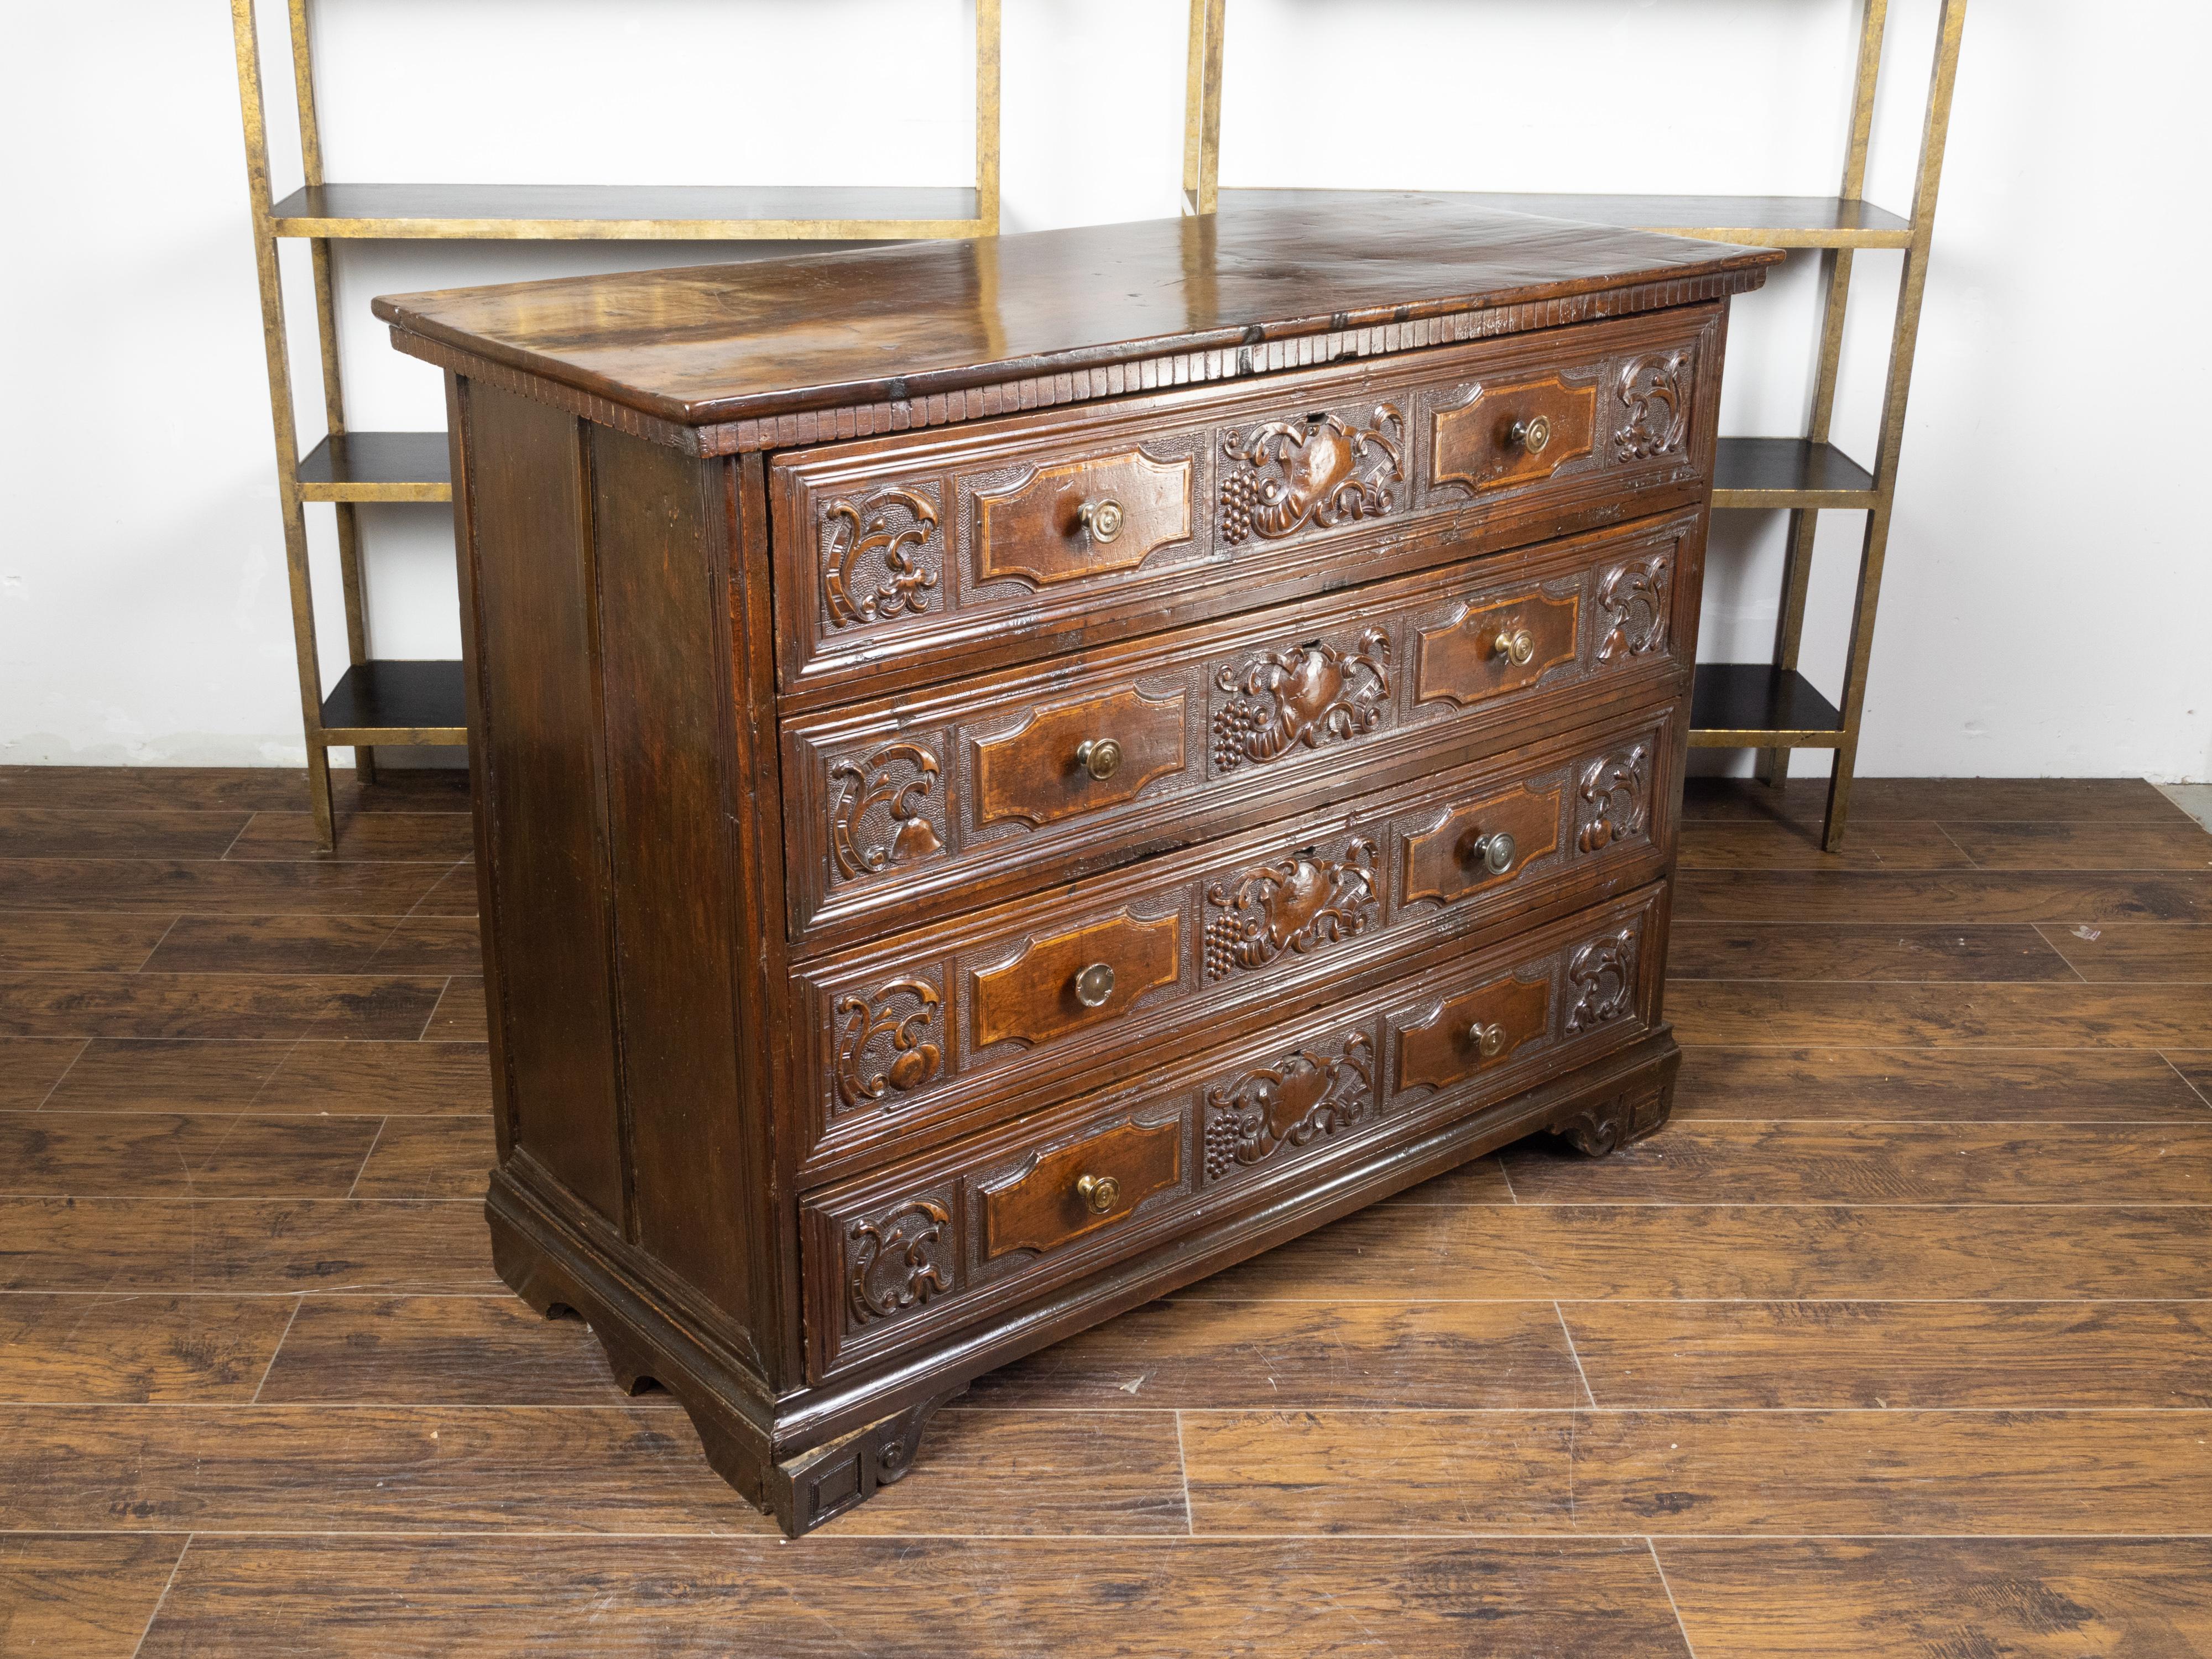 An Italian walnut commode from the late 18th century, with carved scrolls and grape motifs. Created in Italy during the later years of the 18th century, this walnut commode features a rectangular top sitting above a dentil style molding. The façade